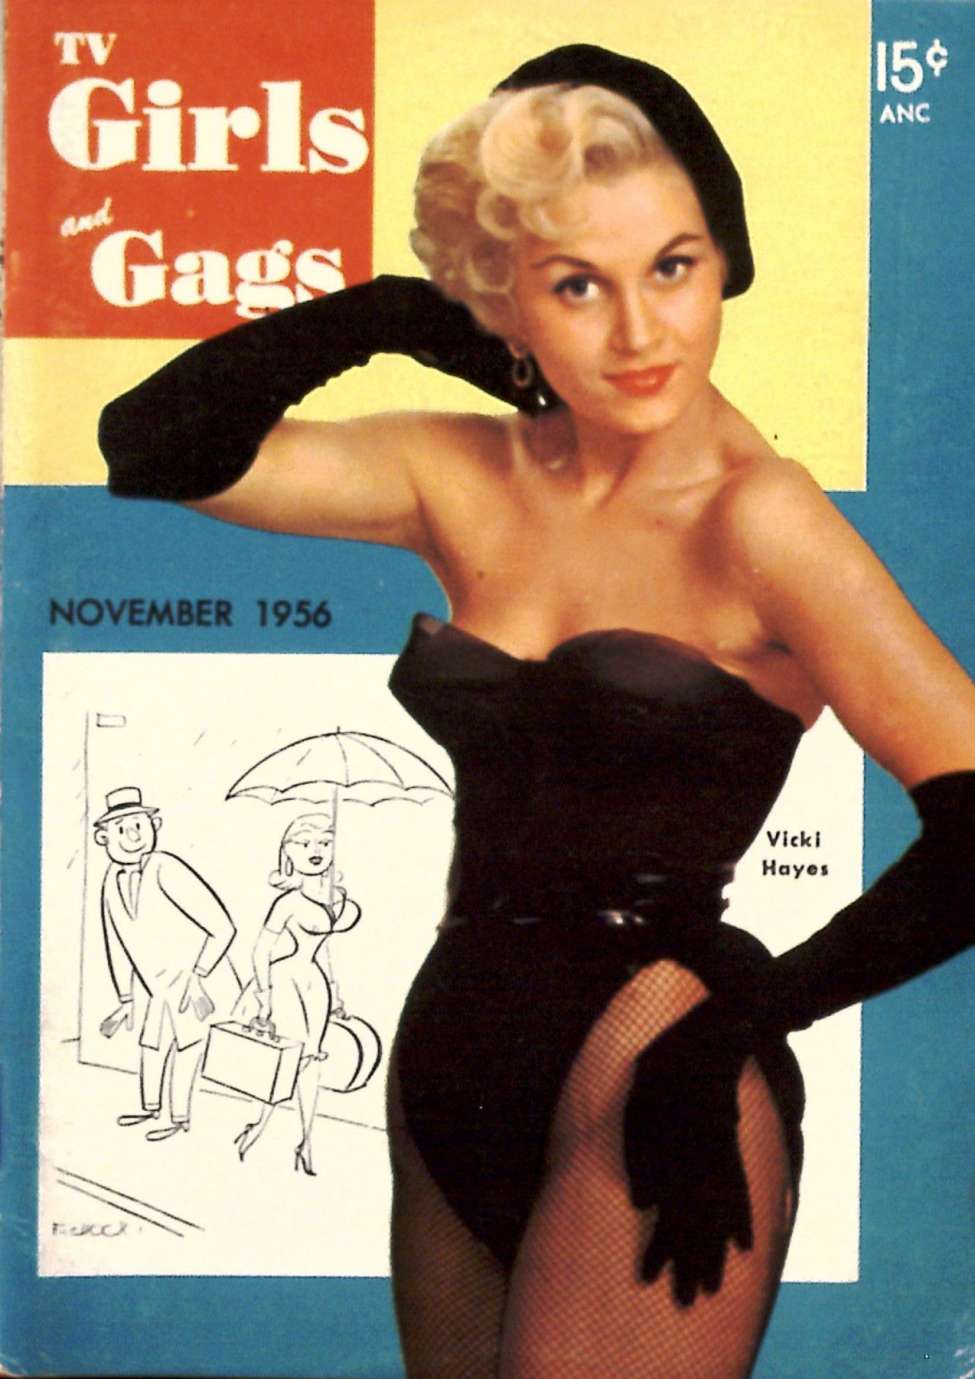 Book Cover For TV Girls and Gags v3 3